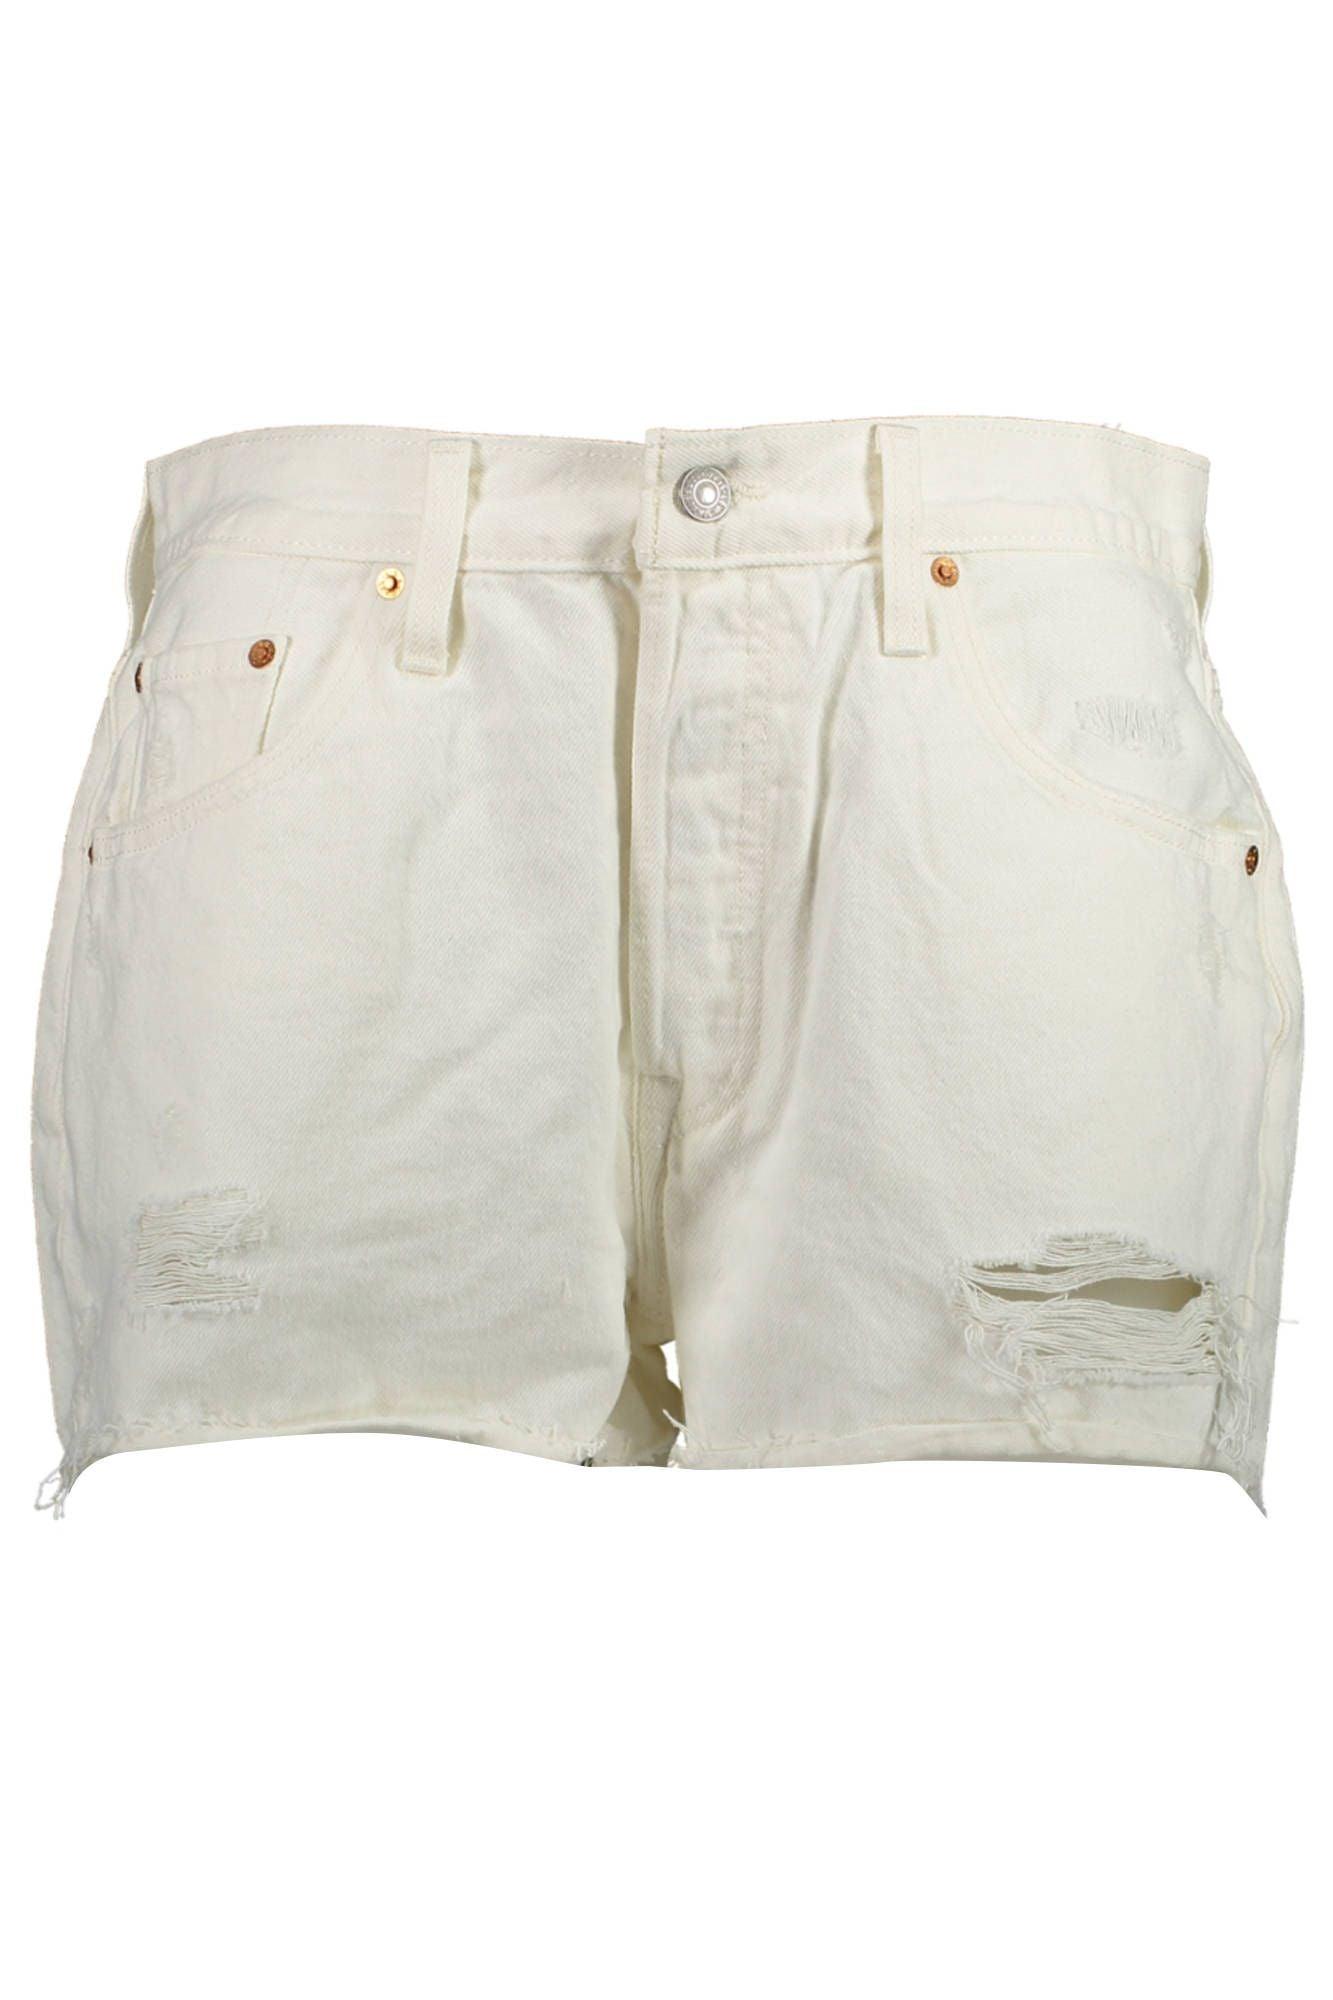 Levi's Chic White Denim Shorts with Classic Appeal - PER.FASHION